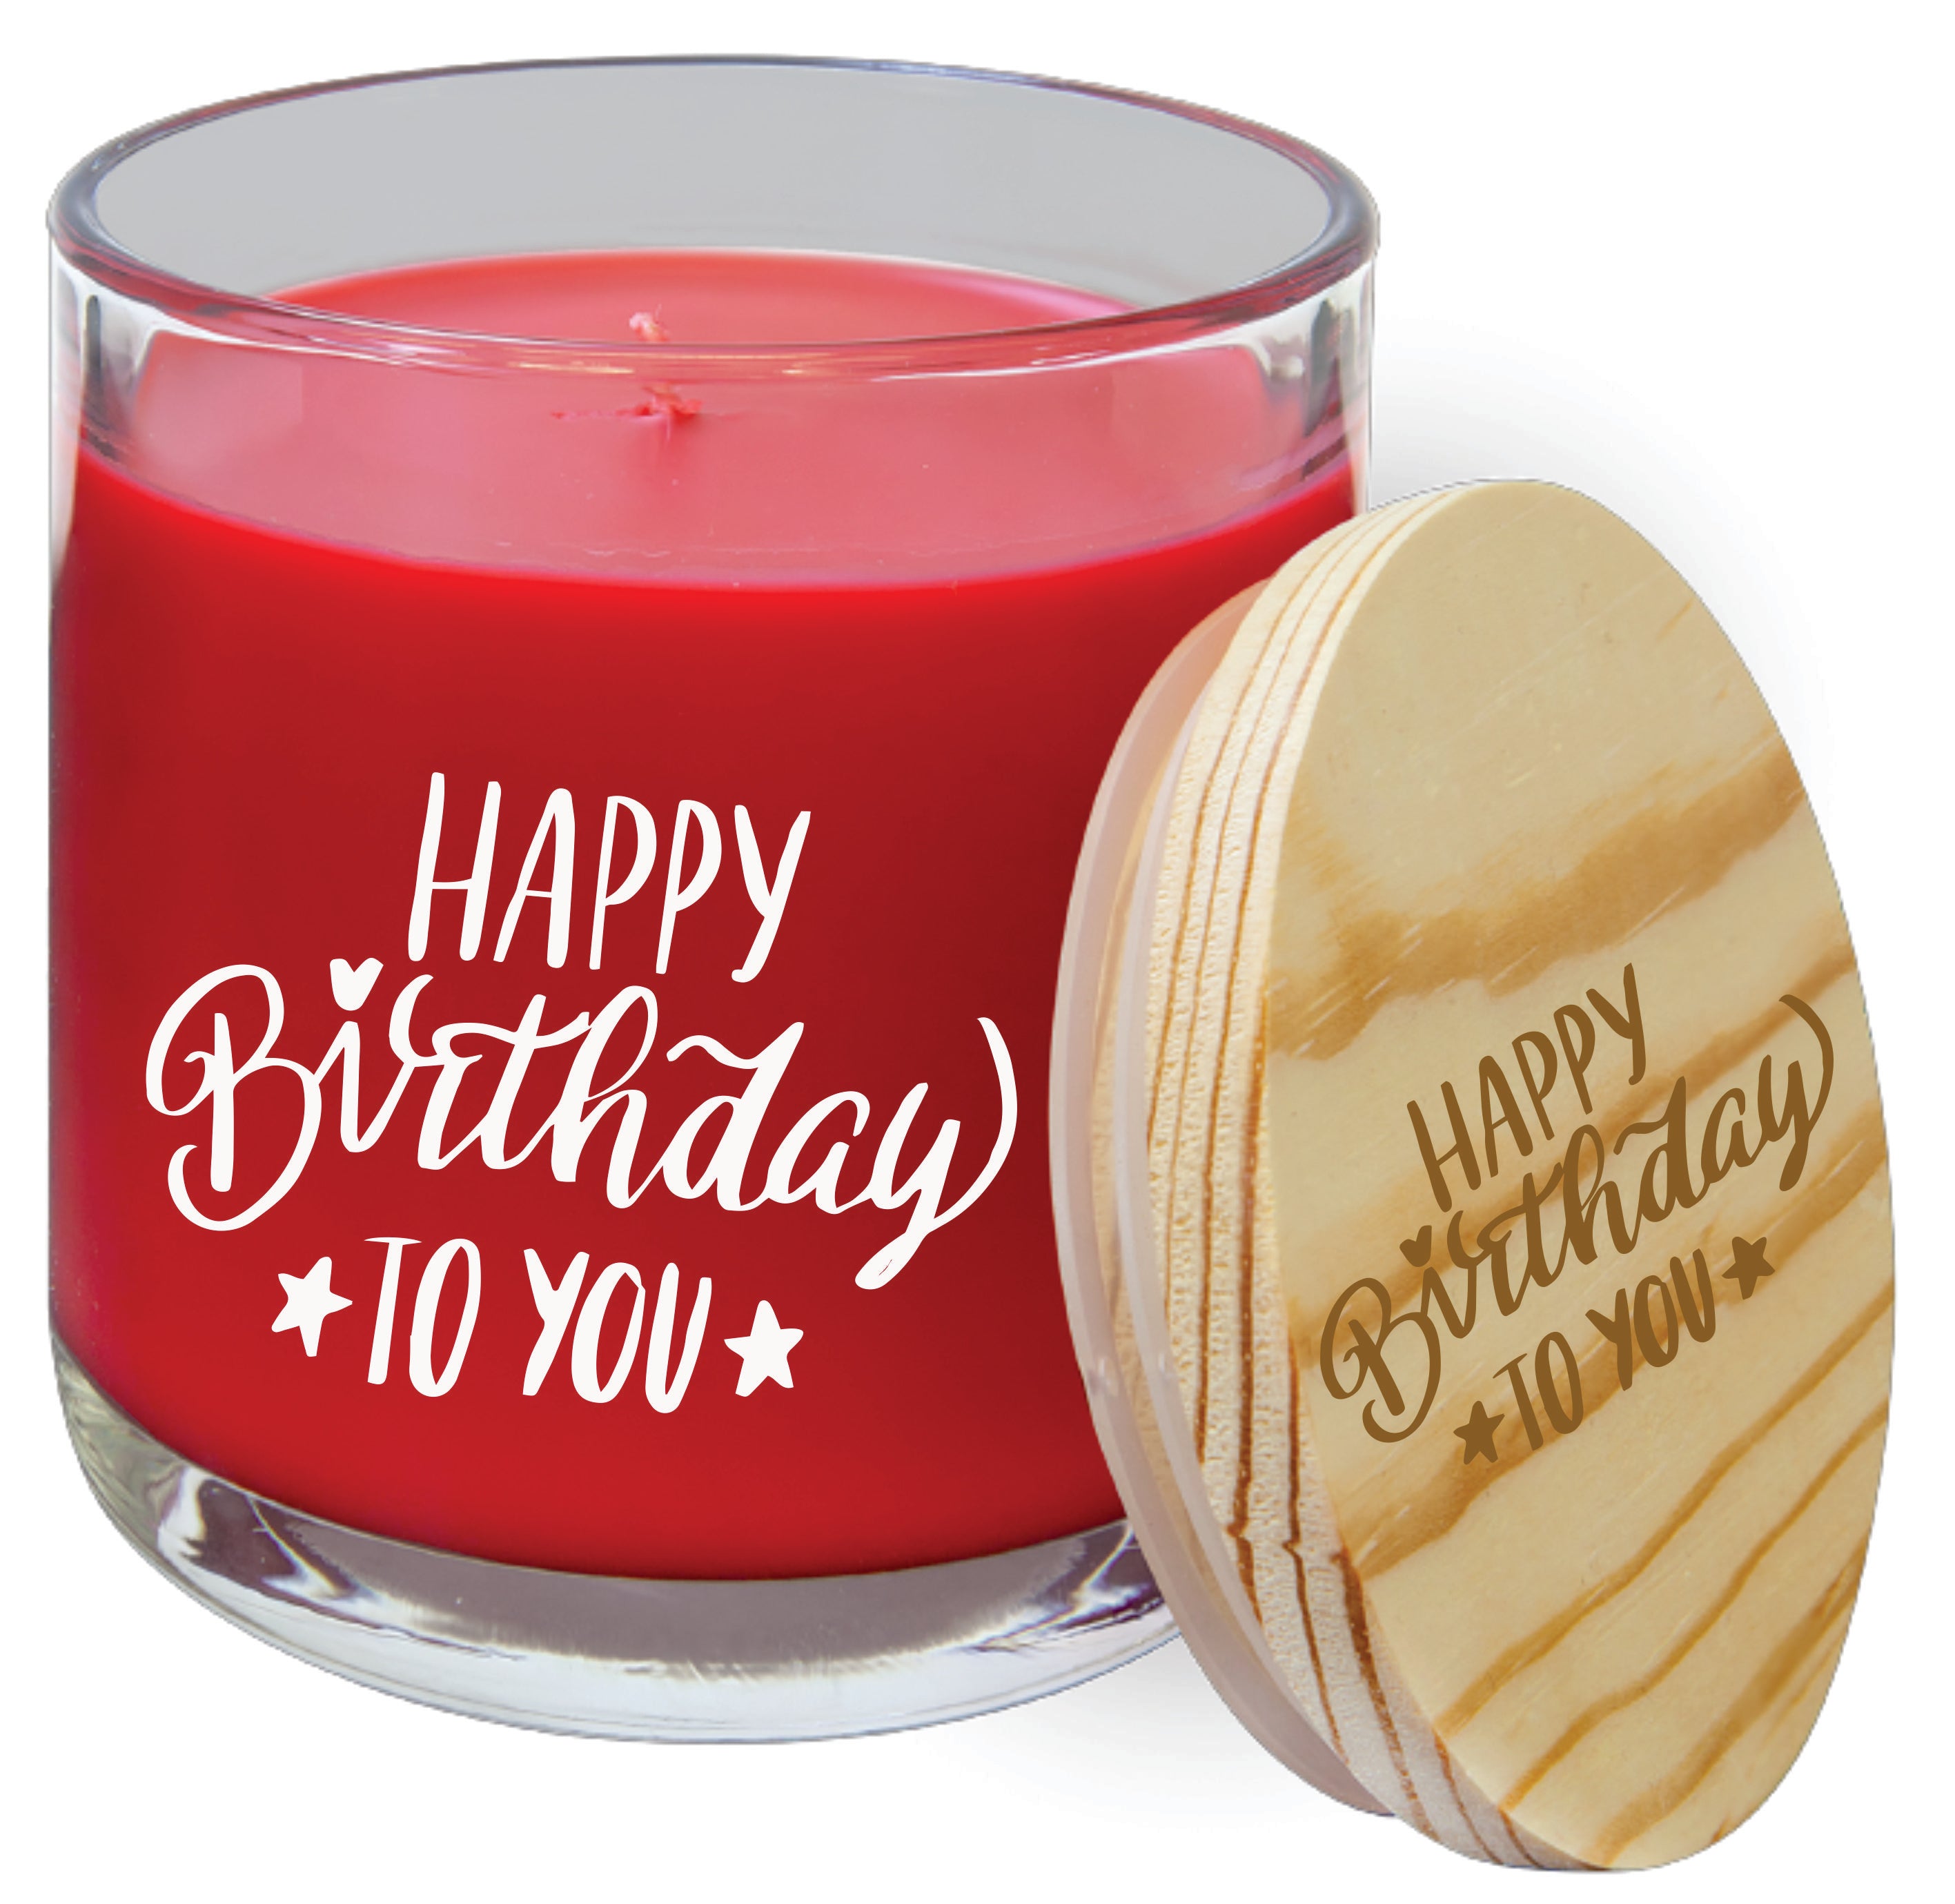 14 oz. Peppermint Twist Candle in a Glass Holder with Wood Lid